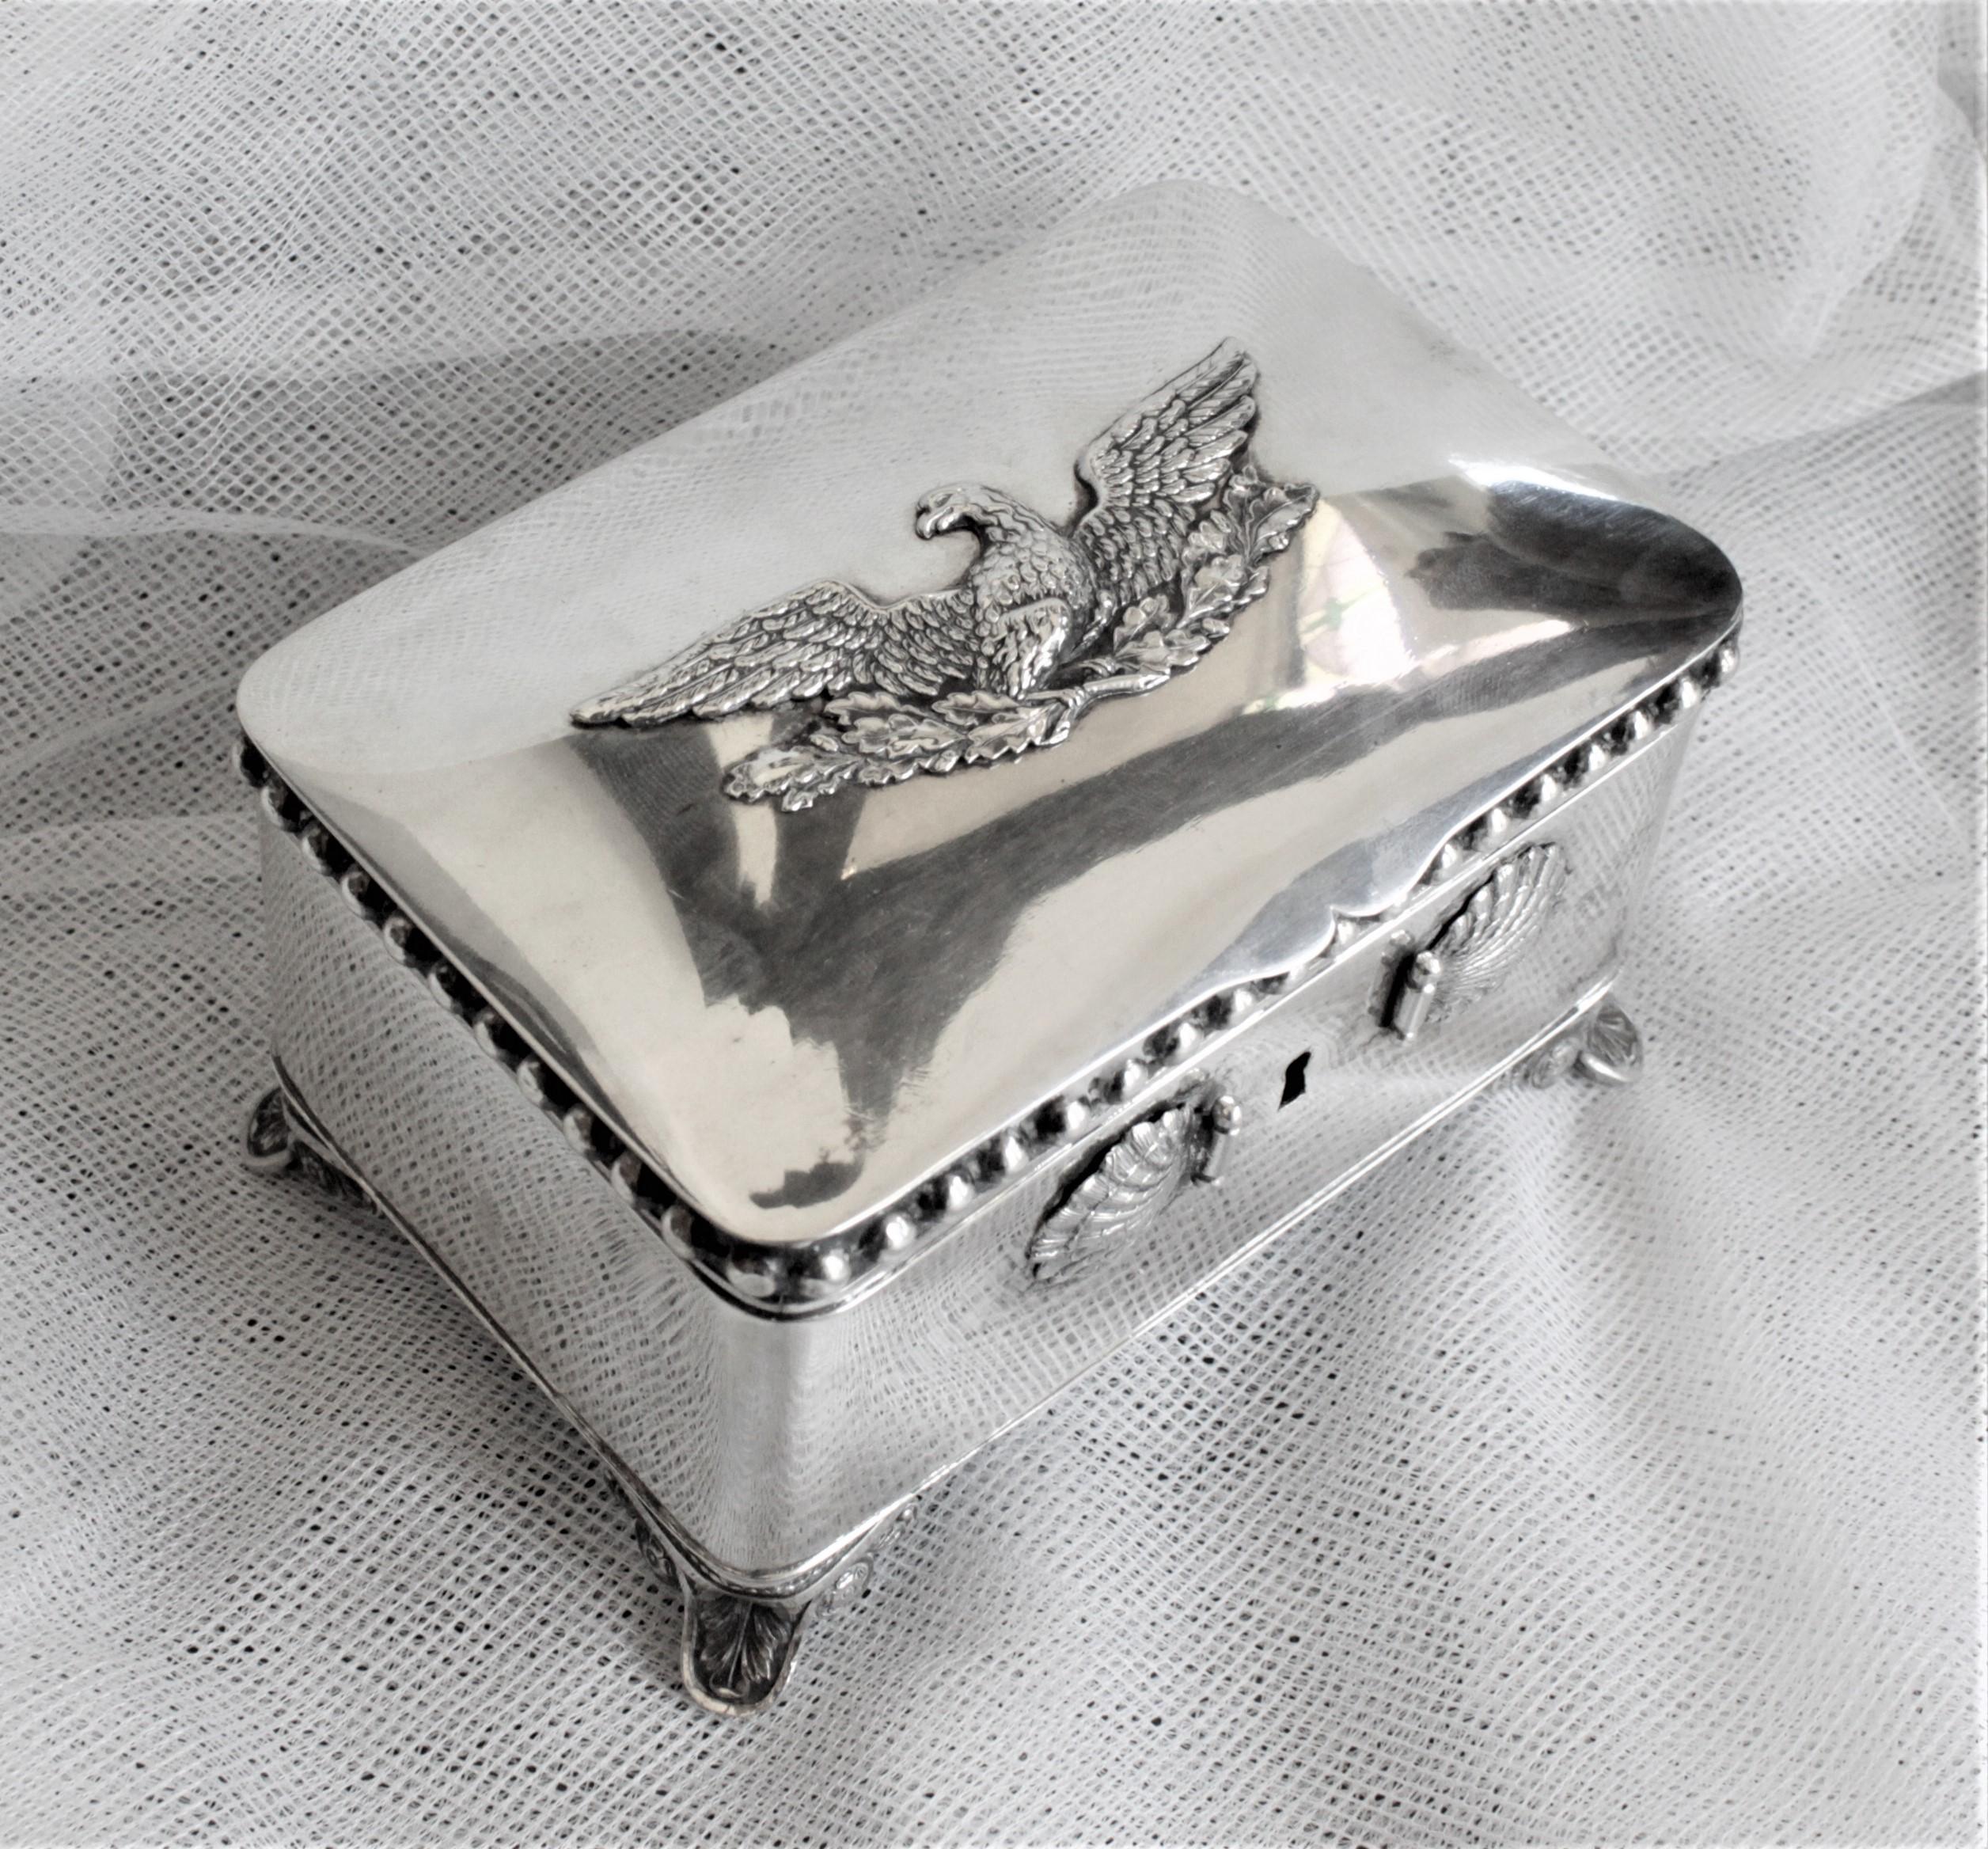 This antique German sugar box is composed of .875 silver and dates to circa 1850 in the Biedermeier style. The box sits on ornately crafted feet and features clam shell relief decoration adorning the front of the box, and atop is a very intricately